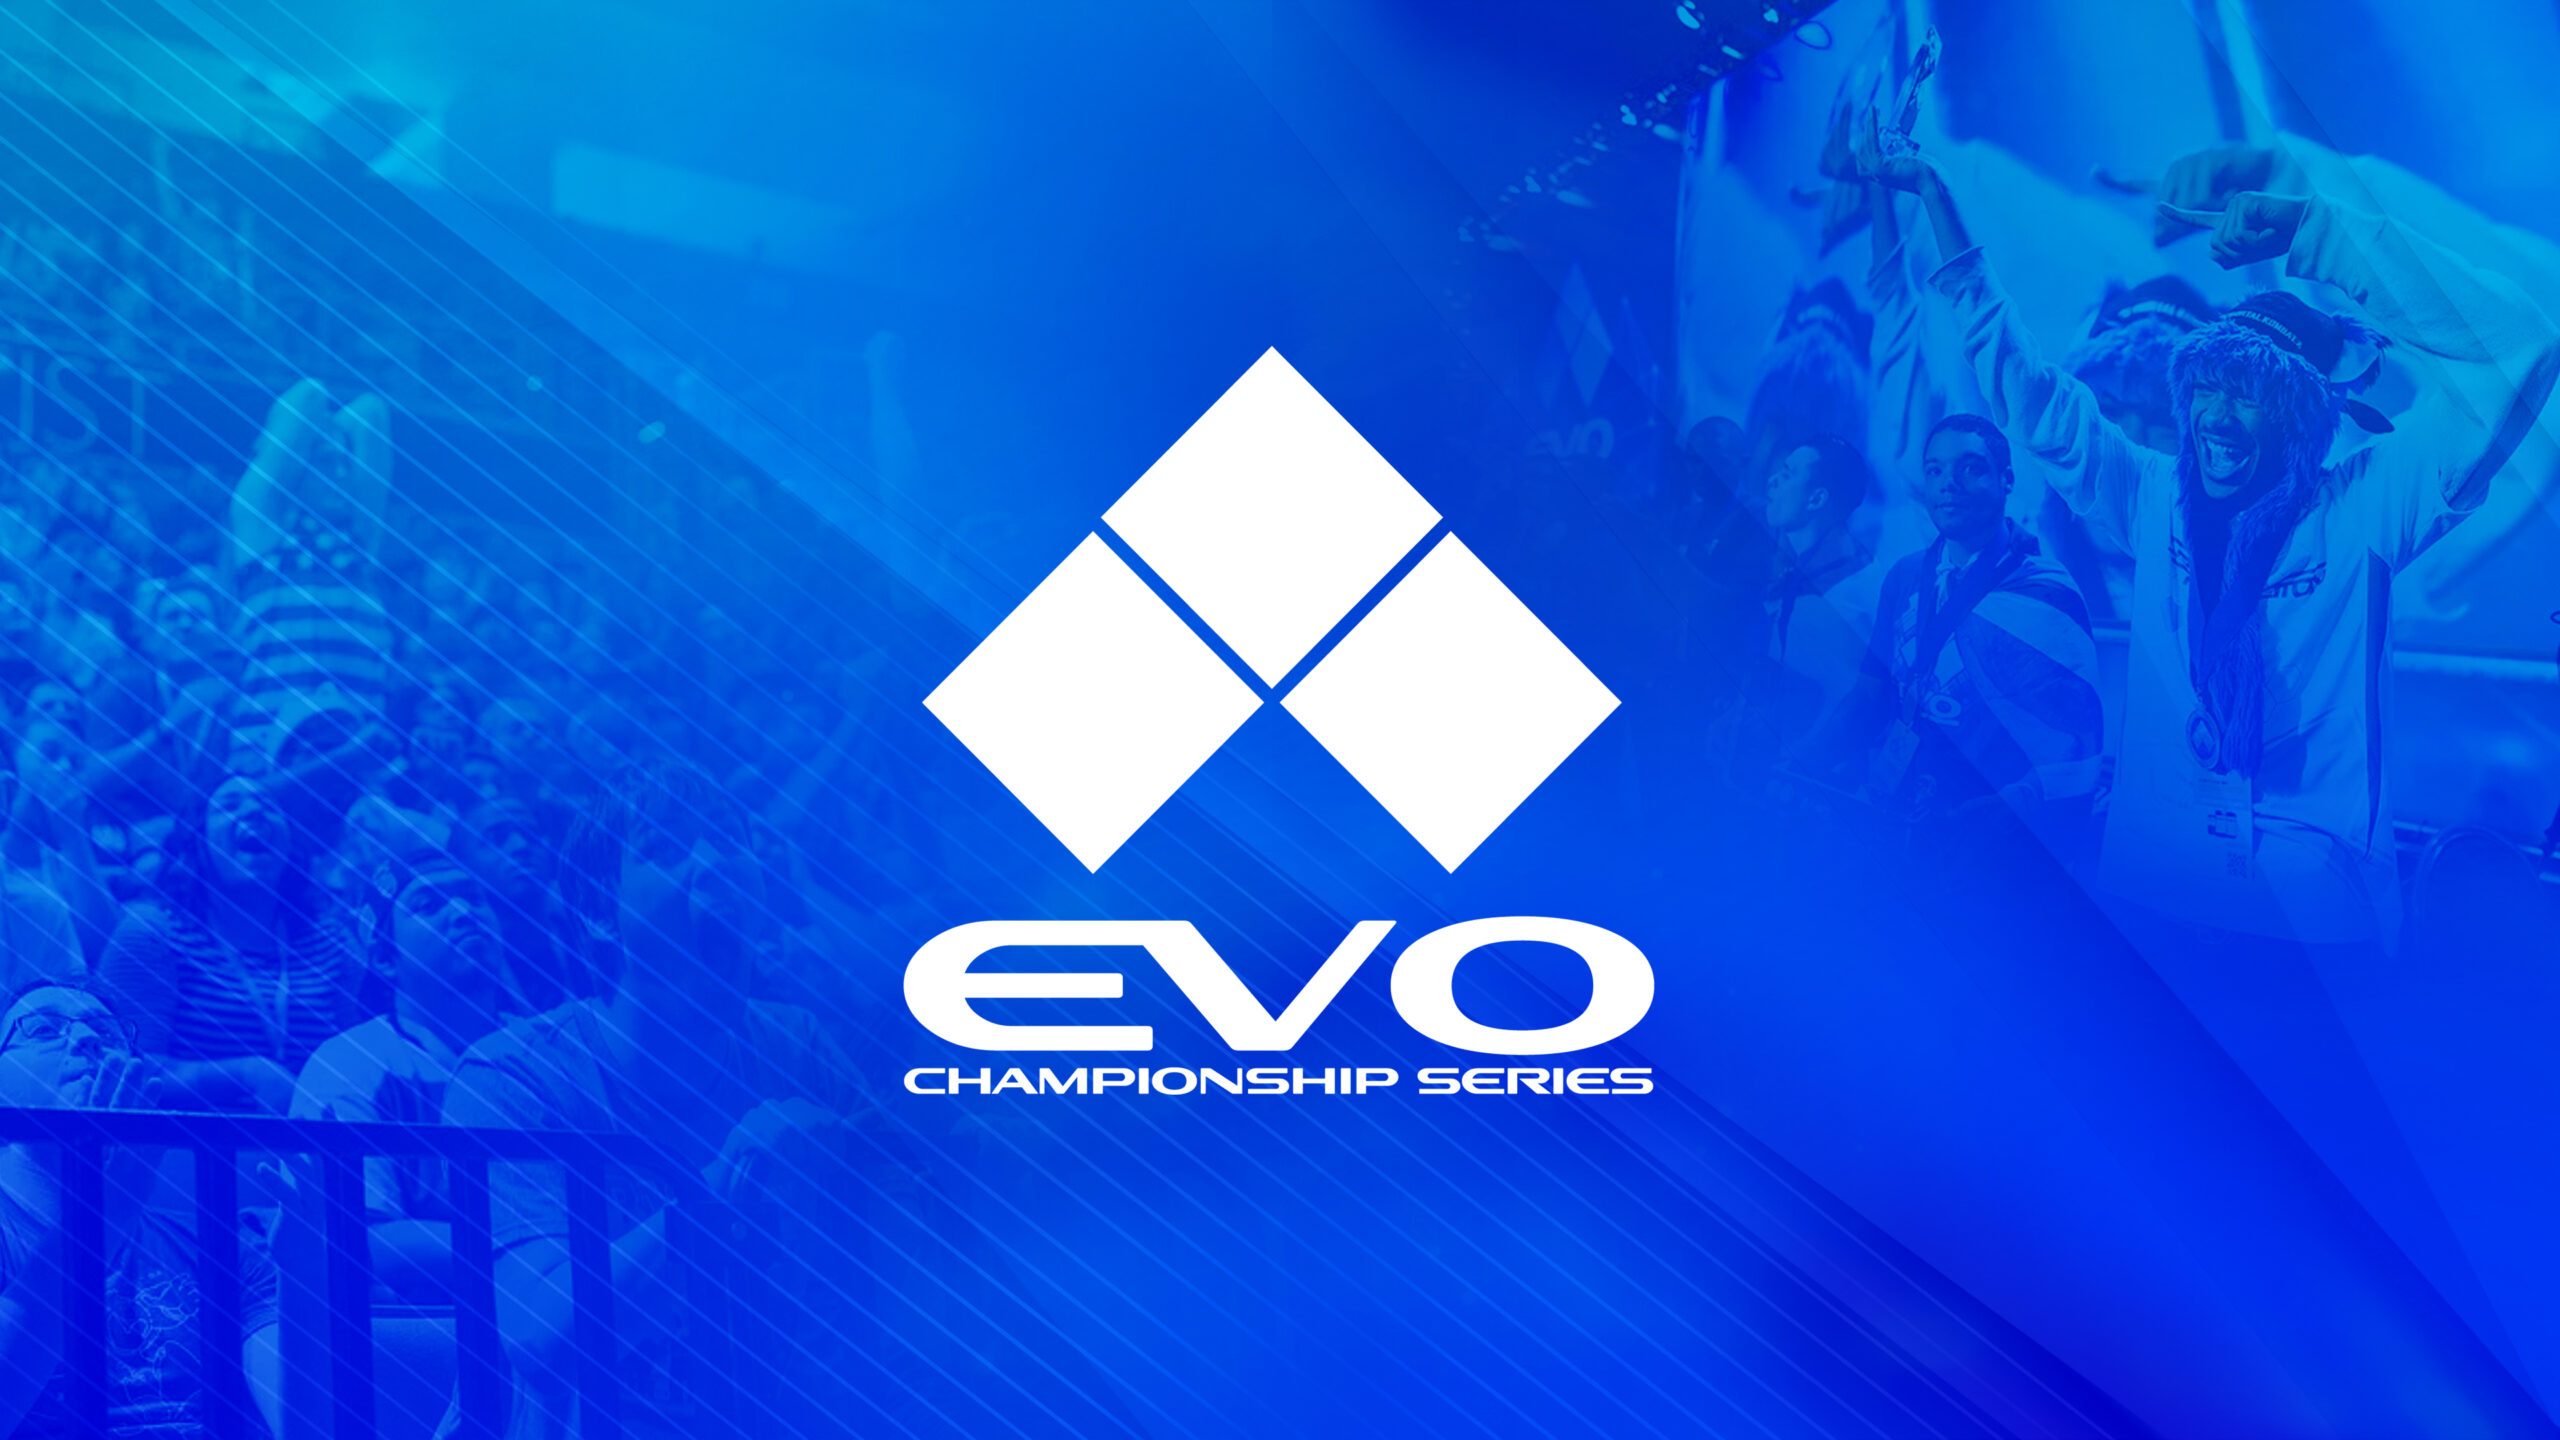 Tekken 8 to be available to play at EVO 2023 on August 4